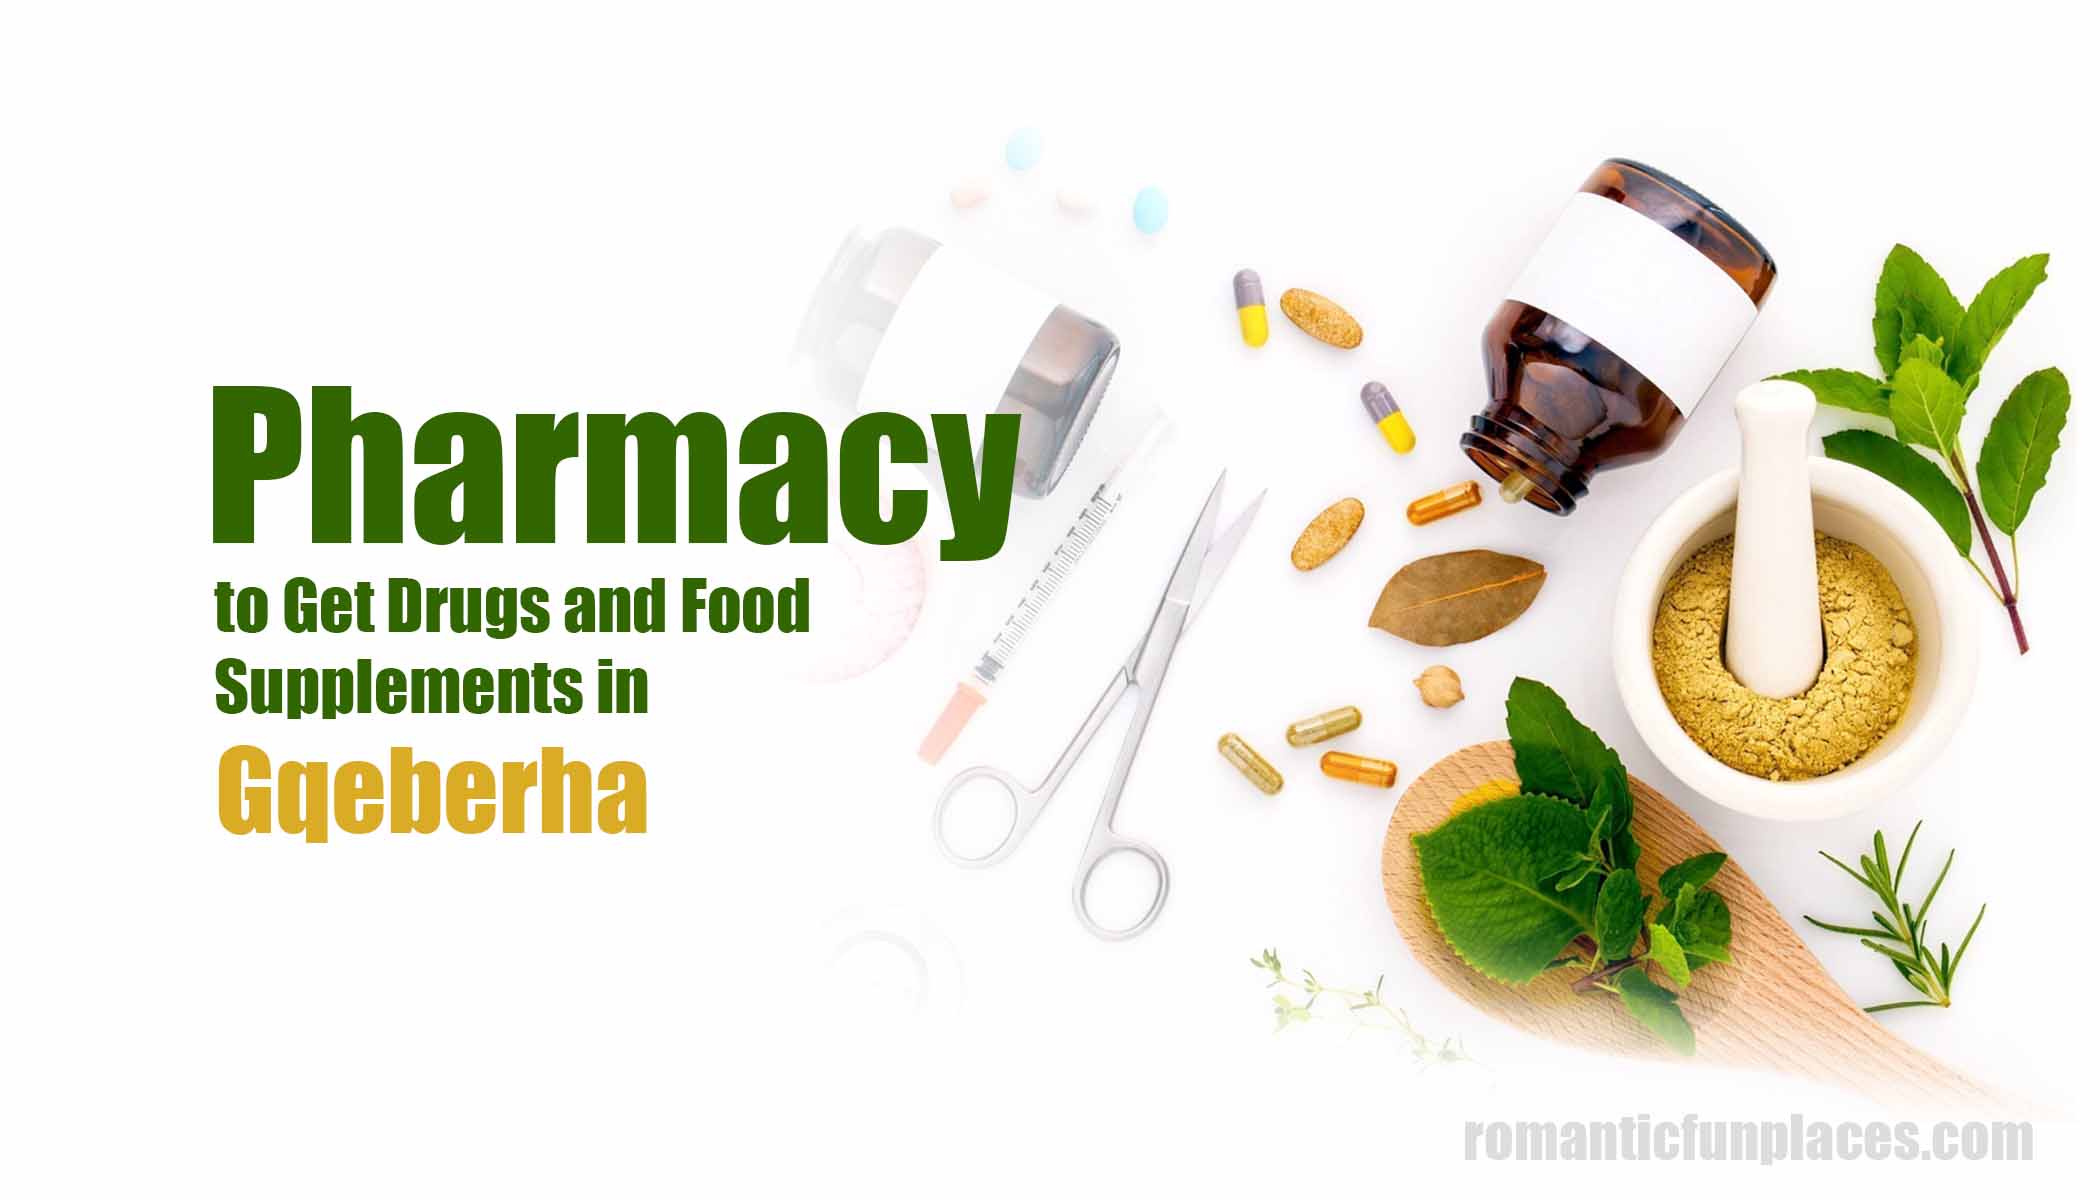 Pharmacy to Get Drugs and Food Supplements In Gqeberha